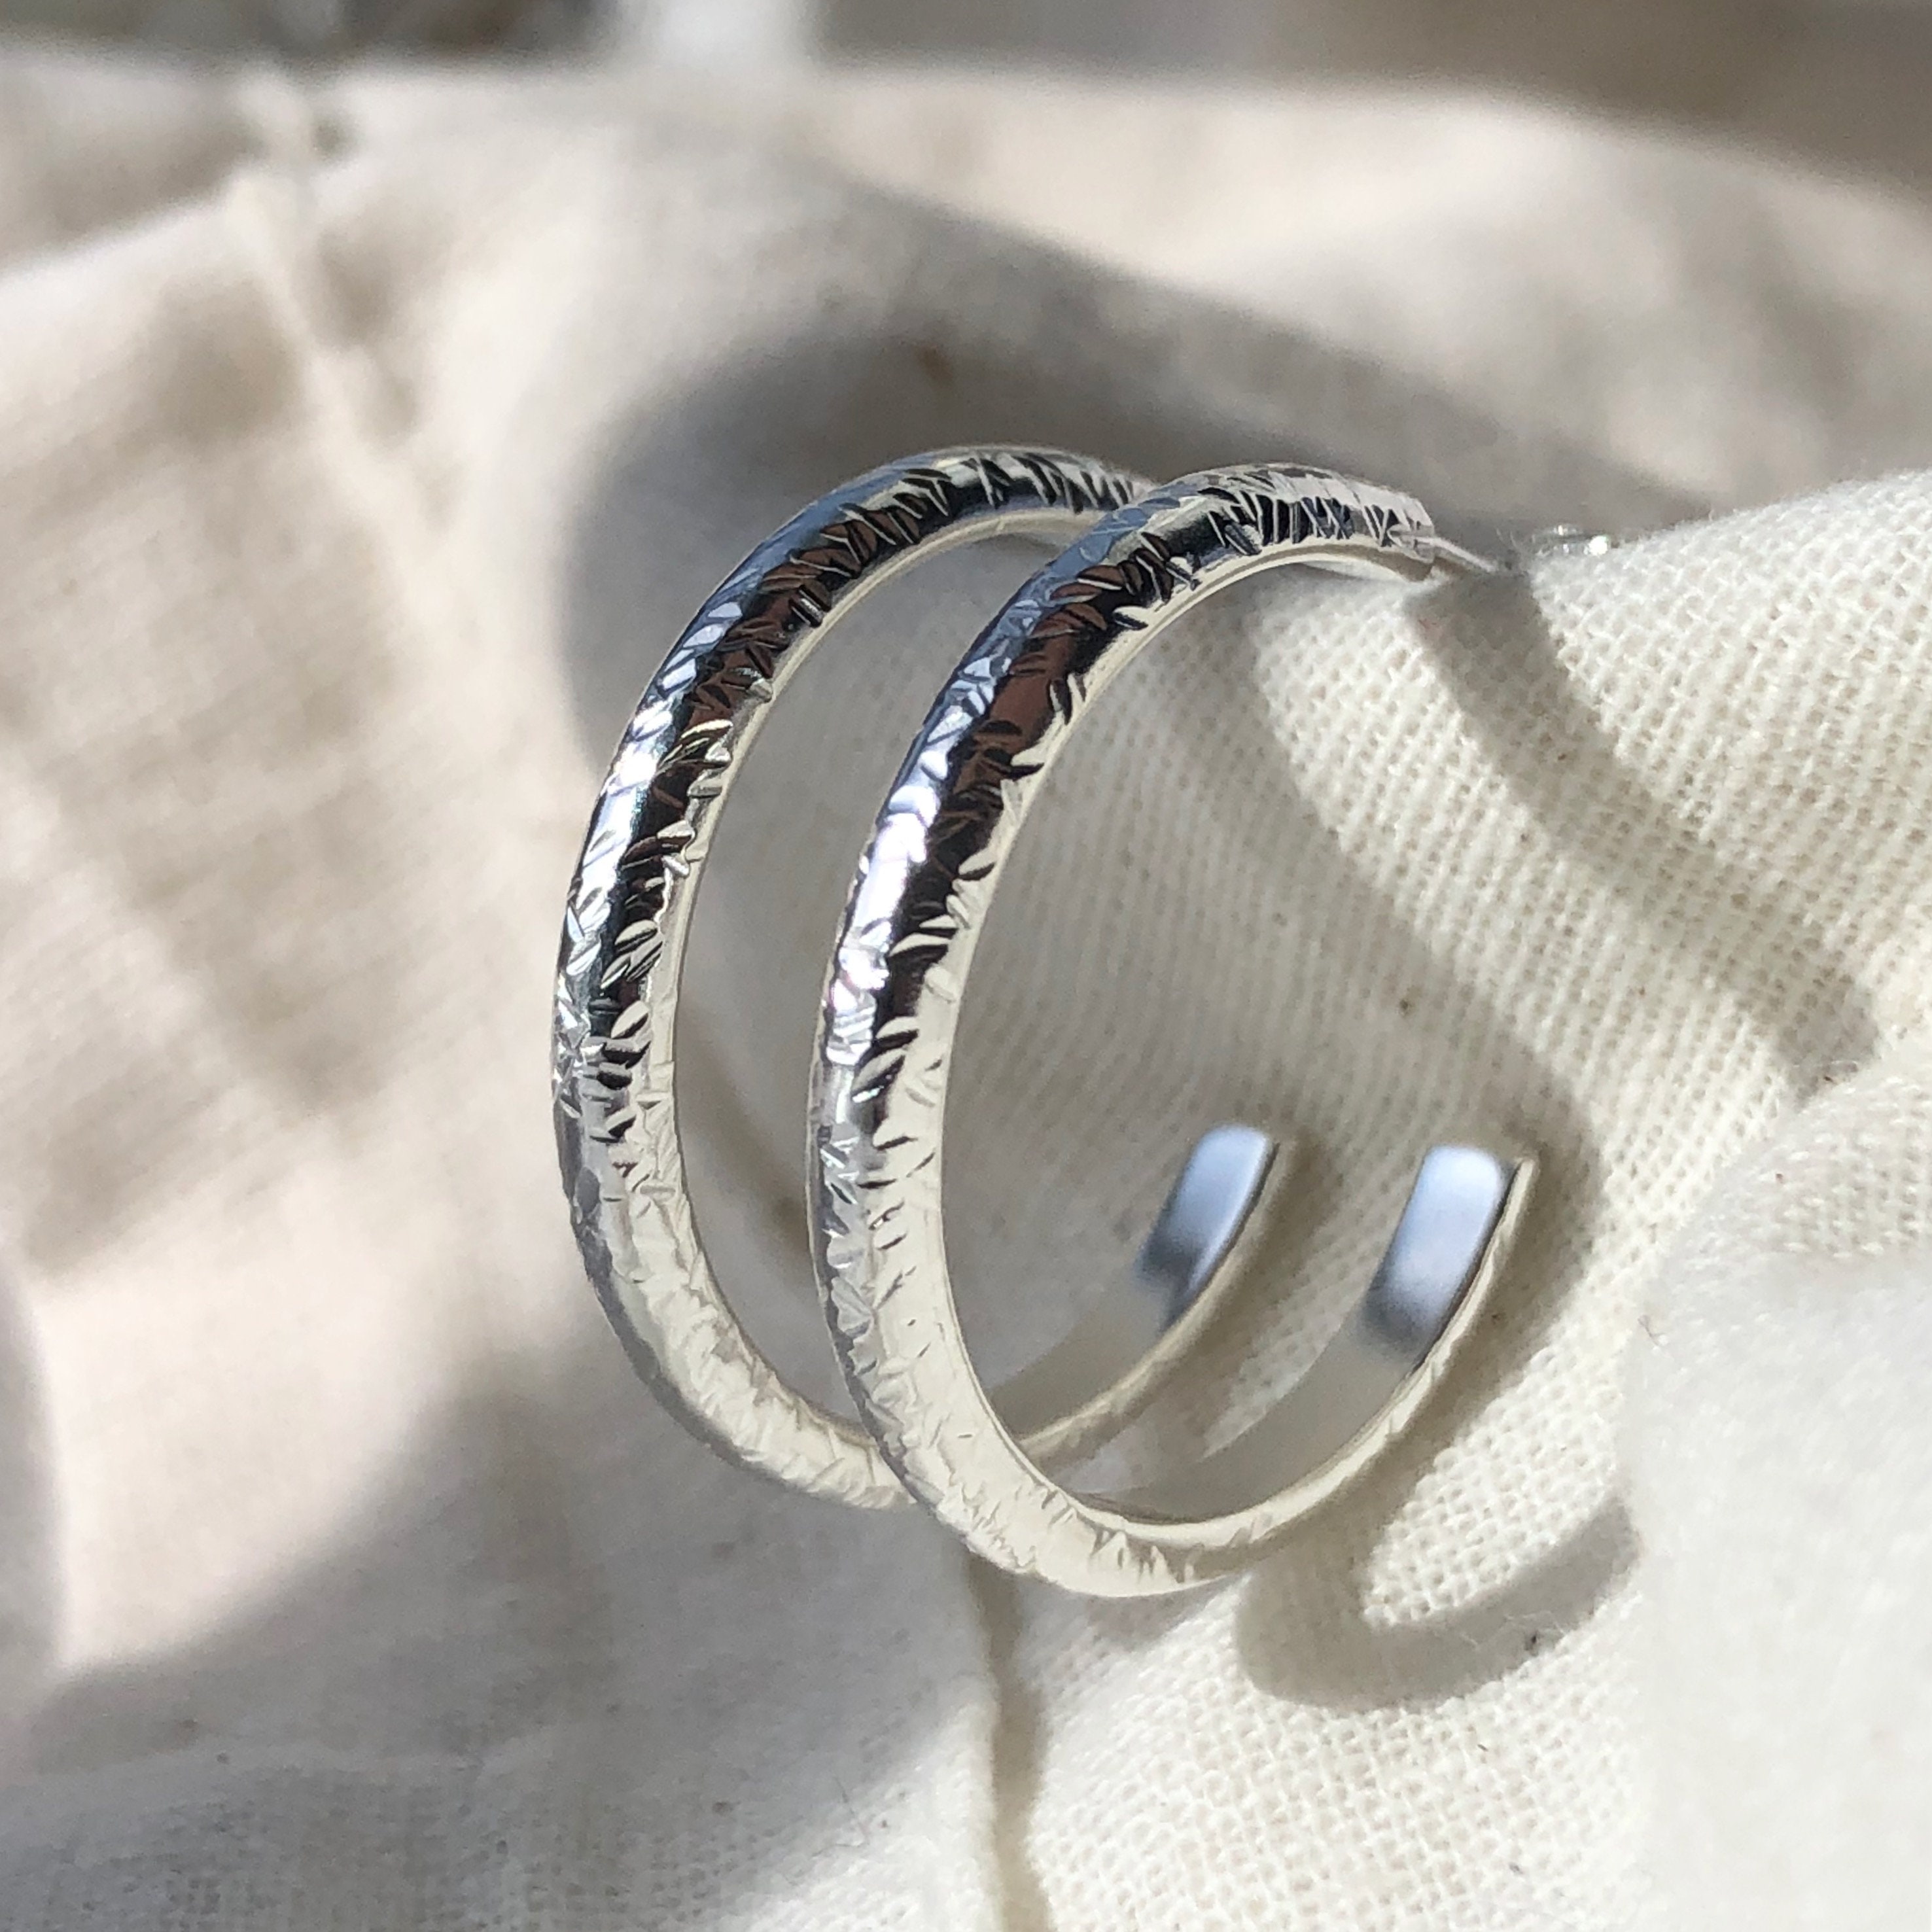 Recycled Silver Medium Hoop Earrings With Textured Detail | Classic Hoops Sustainable Jewellery| Ethical Everyday Jewellery